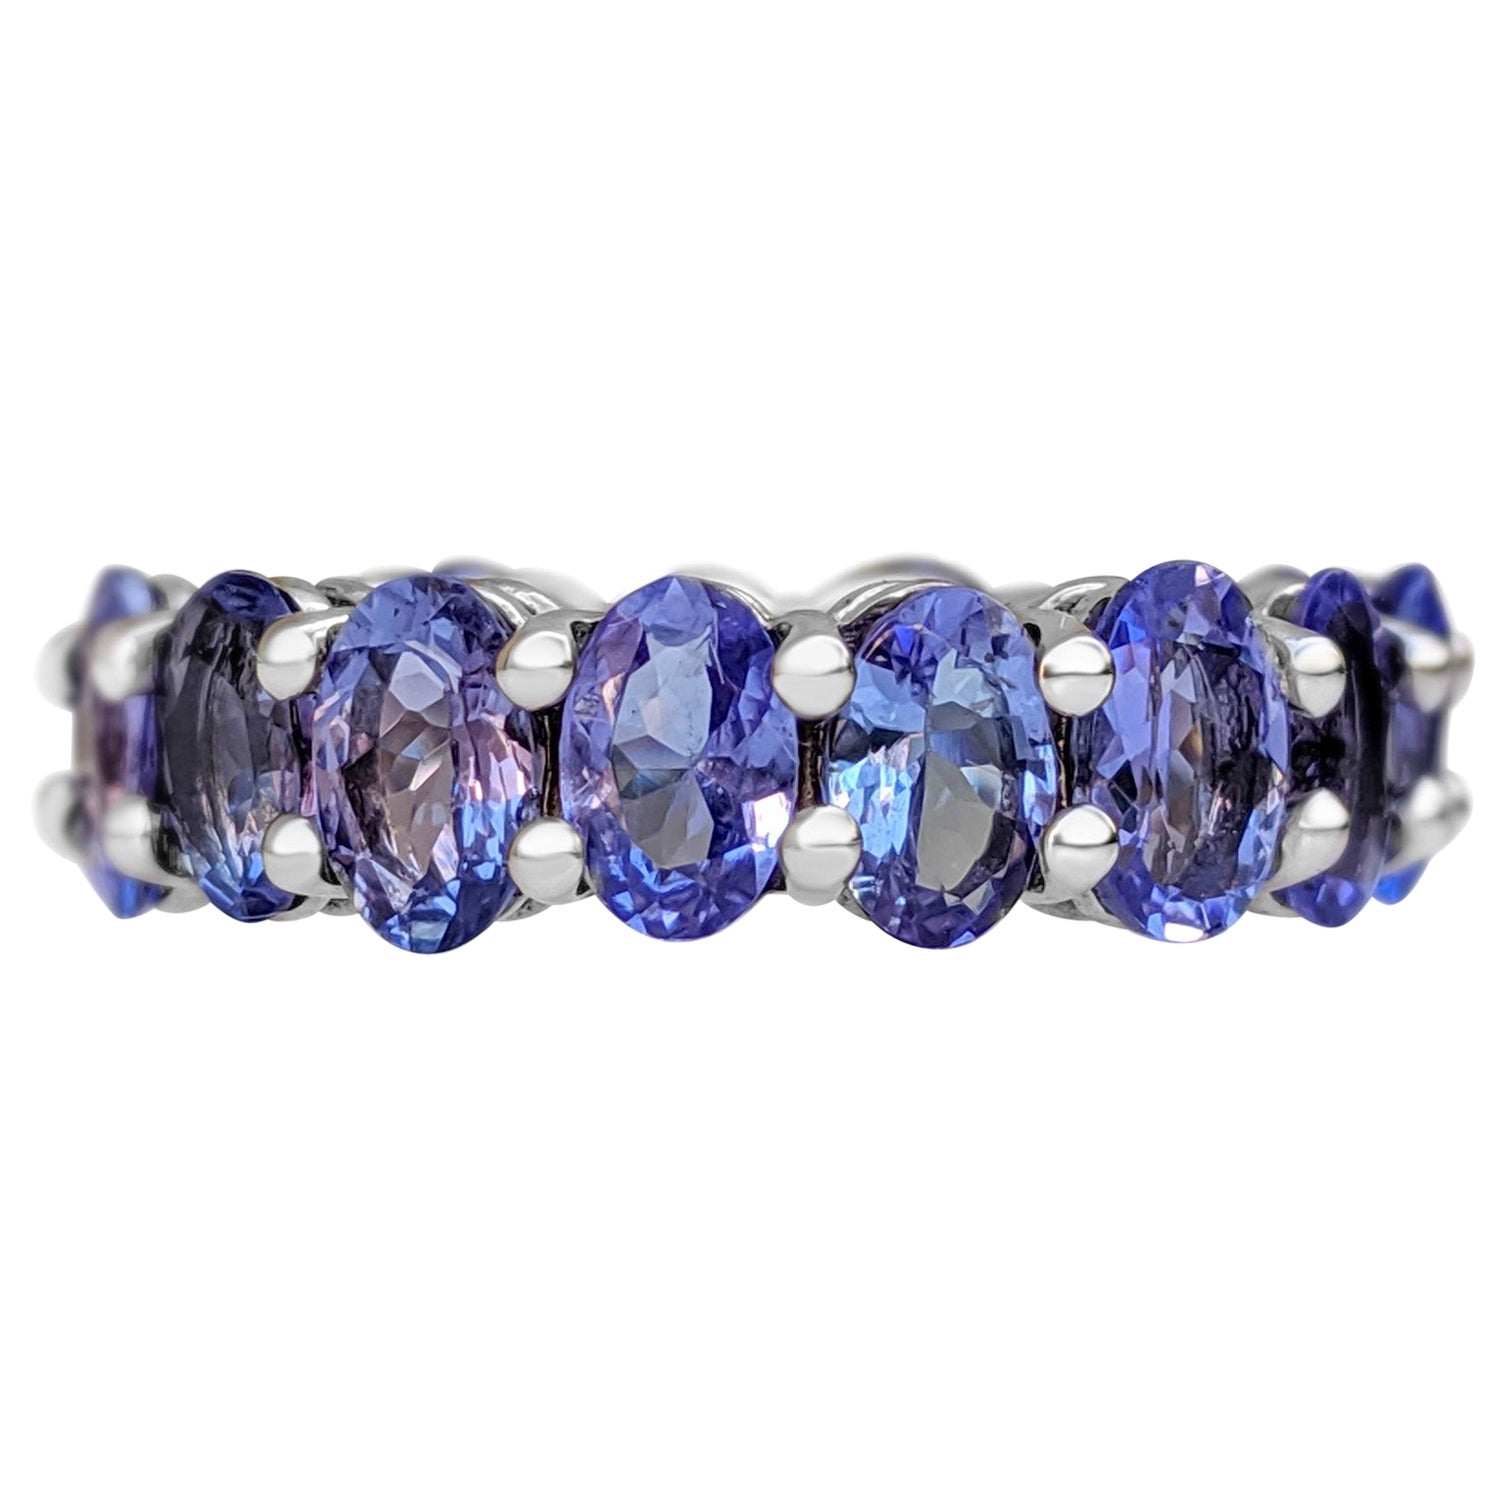 NO RESERVE! 6.37 Carat Tanzanite Eternity Band - 14 kt. White Gold - Ring For Sale